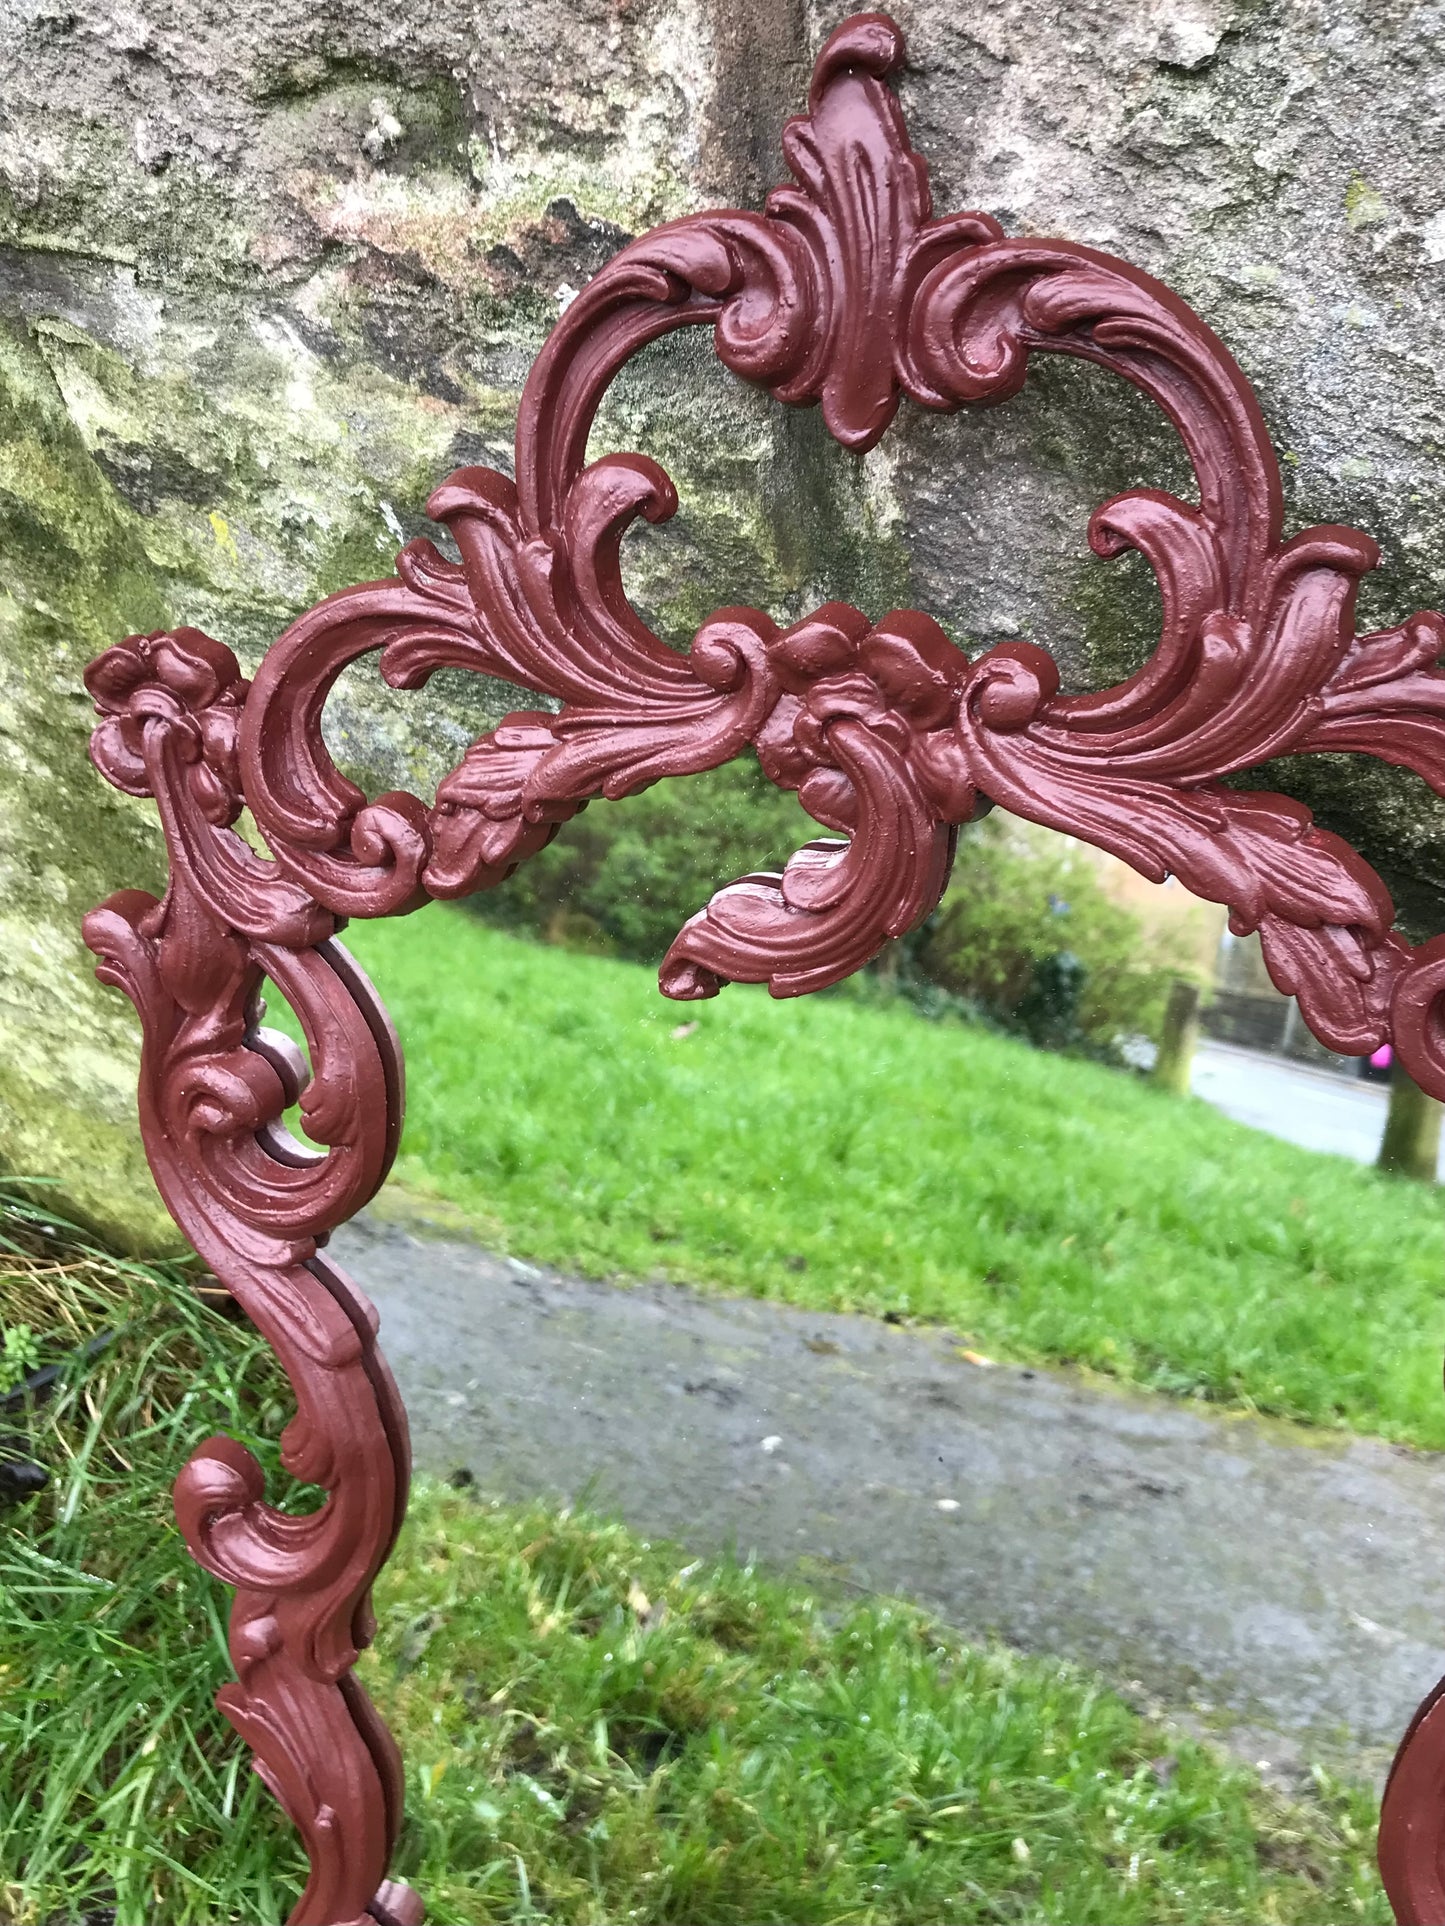 Ornate reproduction vintage plastic moulded  mirror painted in a deep dark burgundy